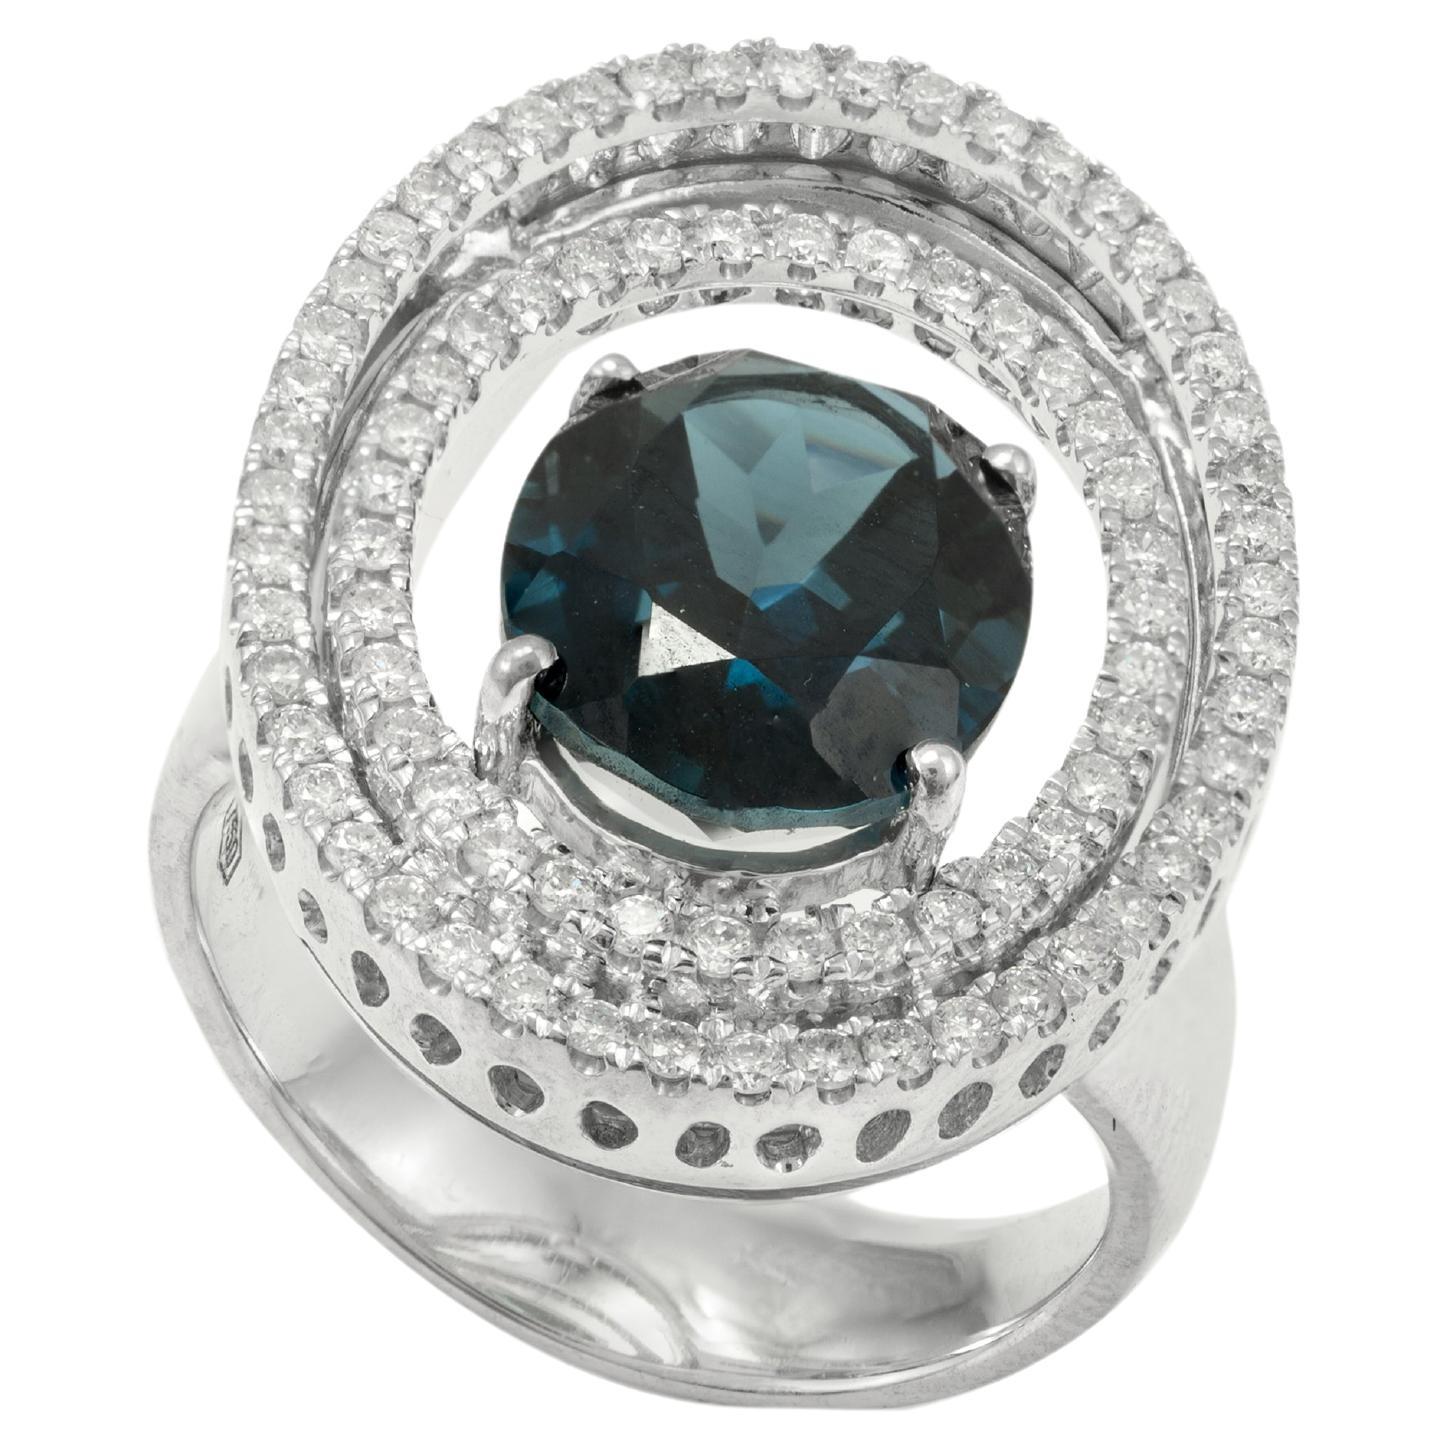 4.98 Carat Blue Topaz and Diamond Halo Ring in 18k Solid White Gold